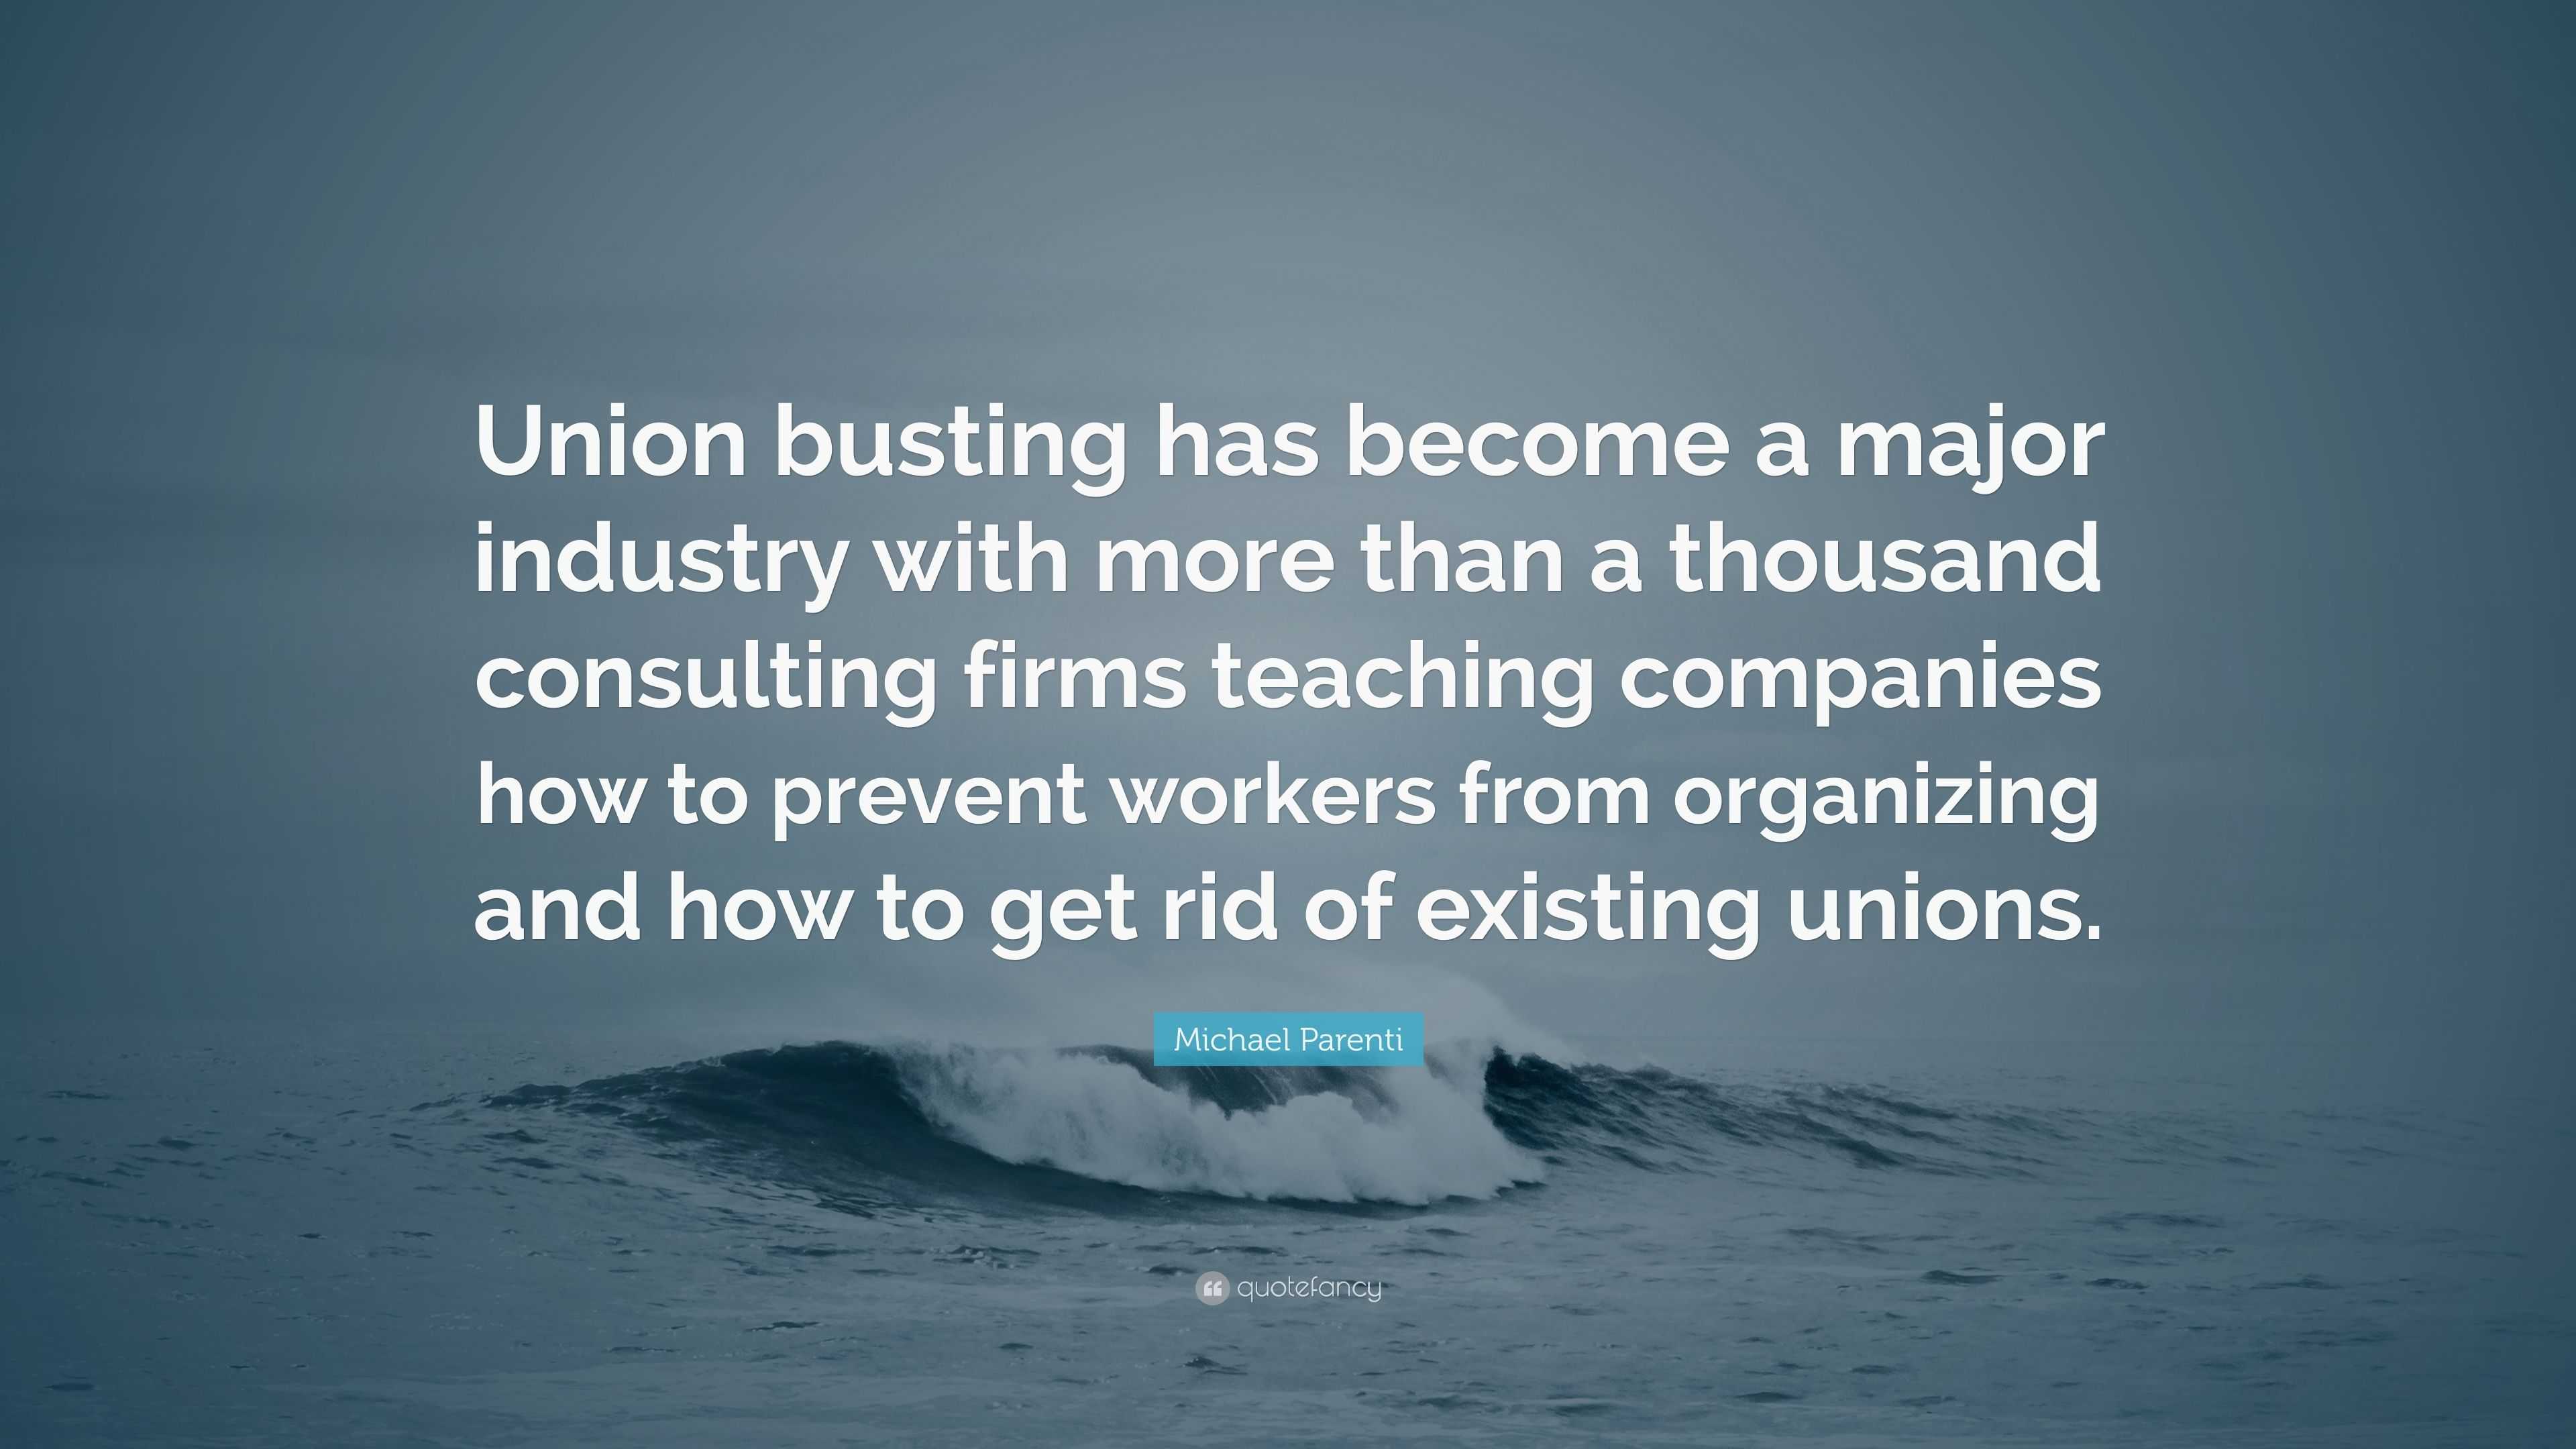 Michael Parenti Quote: “Union busting has become a major industry with more  than a thousand consulting firms teaching companies how to prevent w”